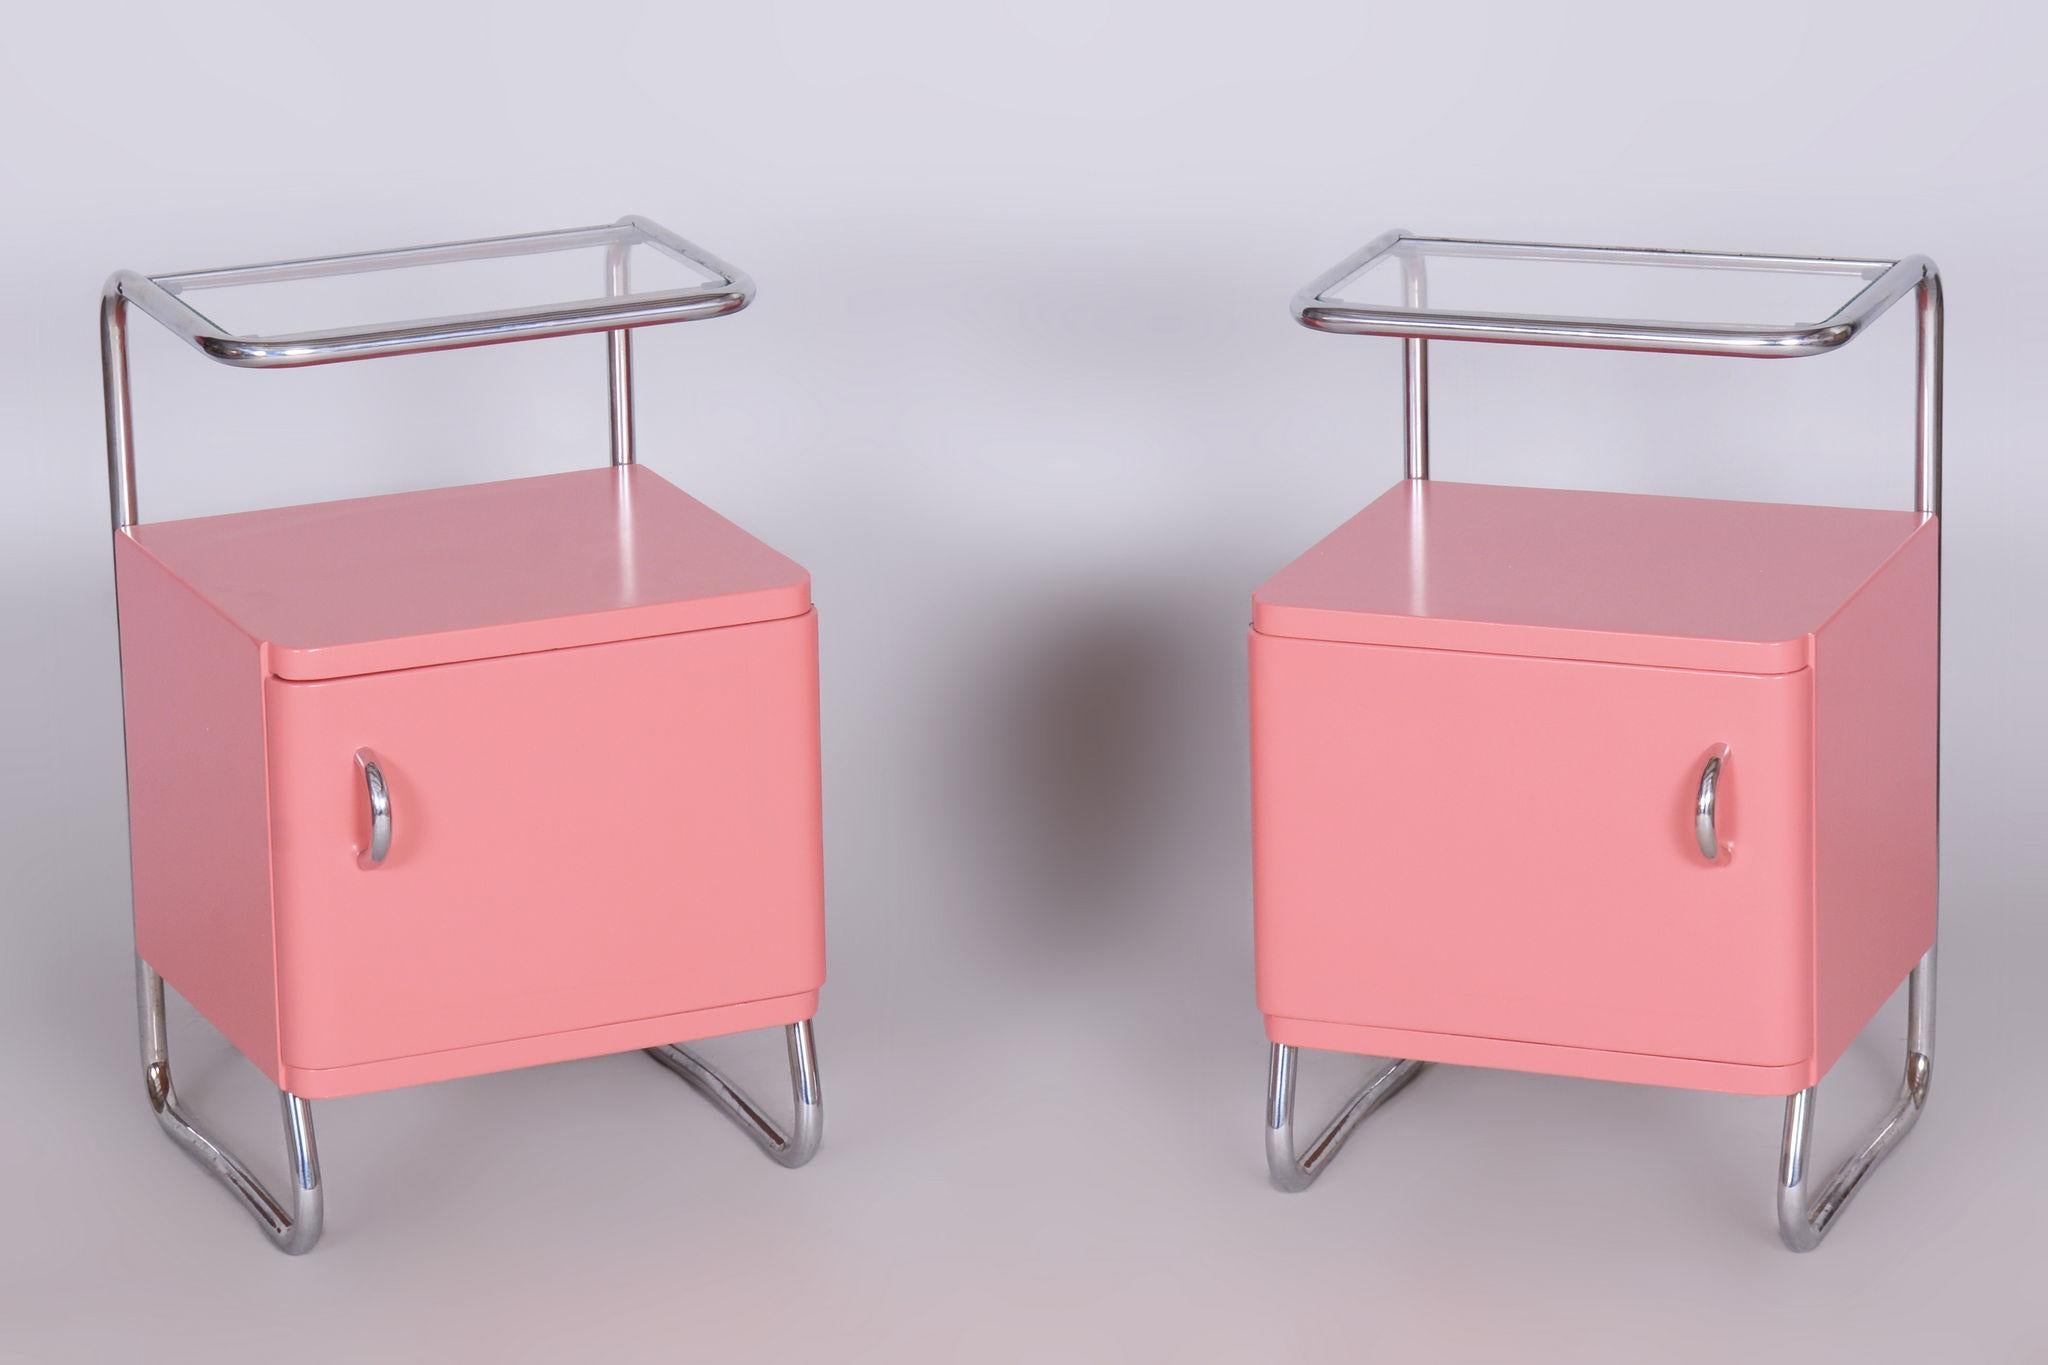 Restored Bauhaus Pair of Bed-Side Tables, Chrome-Plated Steel, Czechia, 1940s For Sale 6